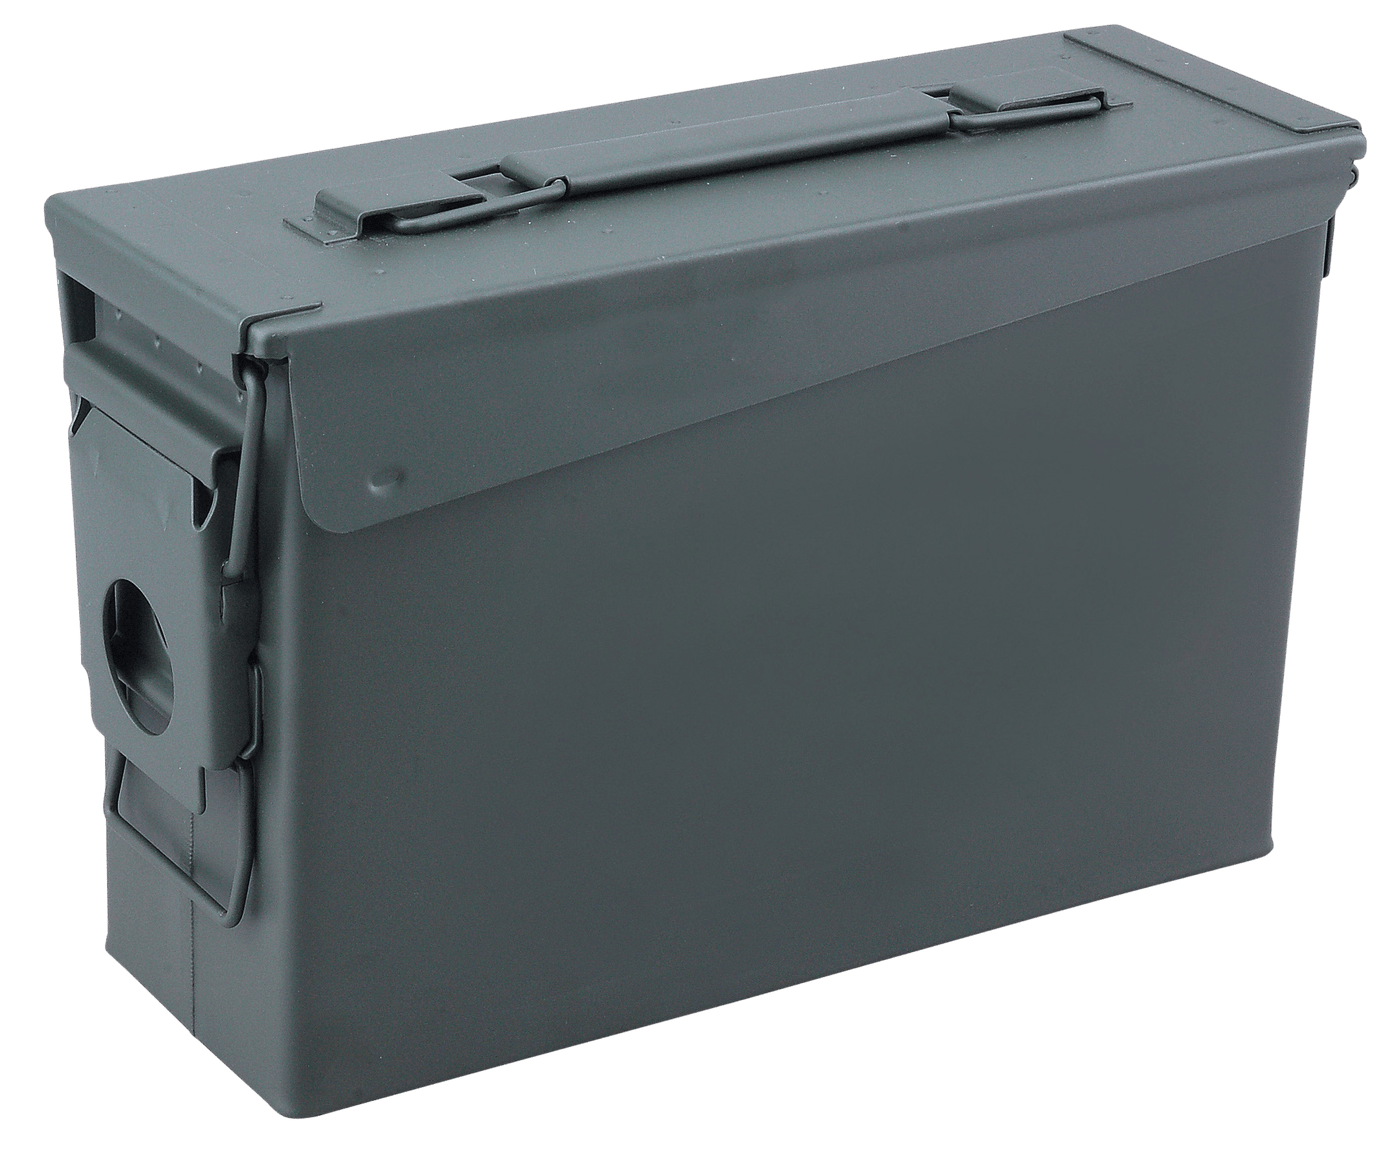 RANGER RUGGED GEAR Ranger Rugged Gear Ammo Can, Reliant Rrg-10104     30 Cal Metal Ammo Can    Grn Shooting